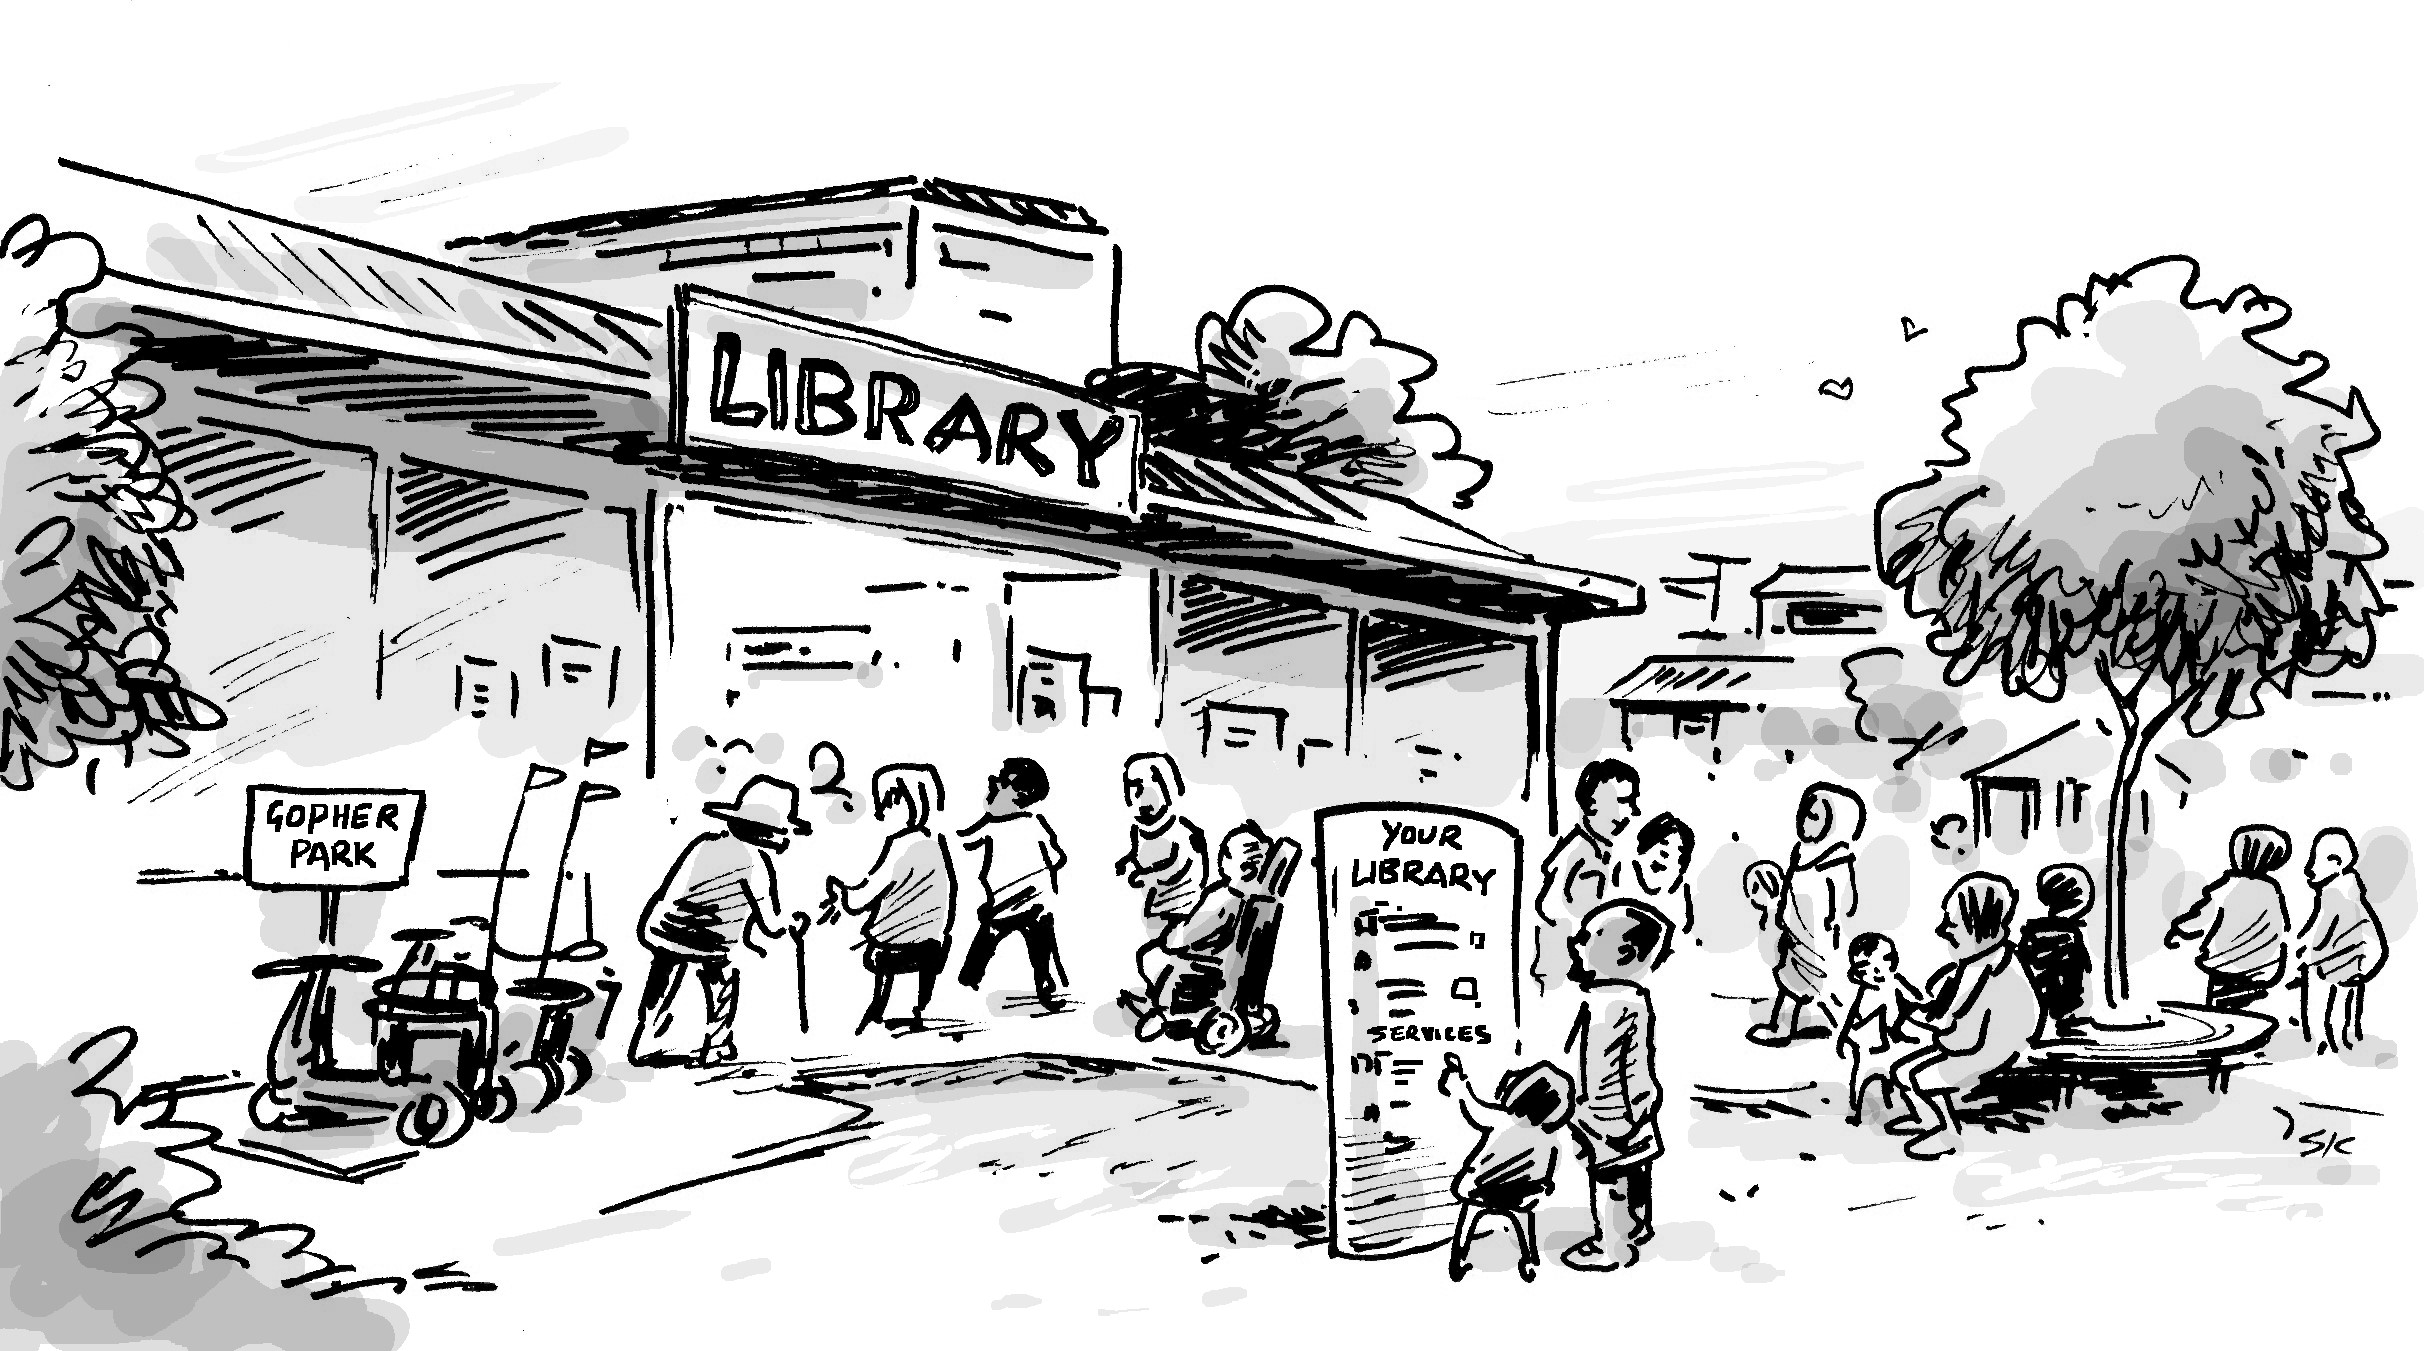 How are libraries responding to demographic change?